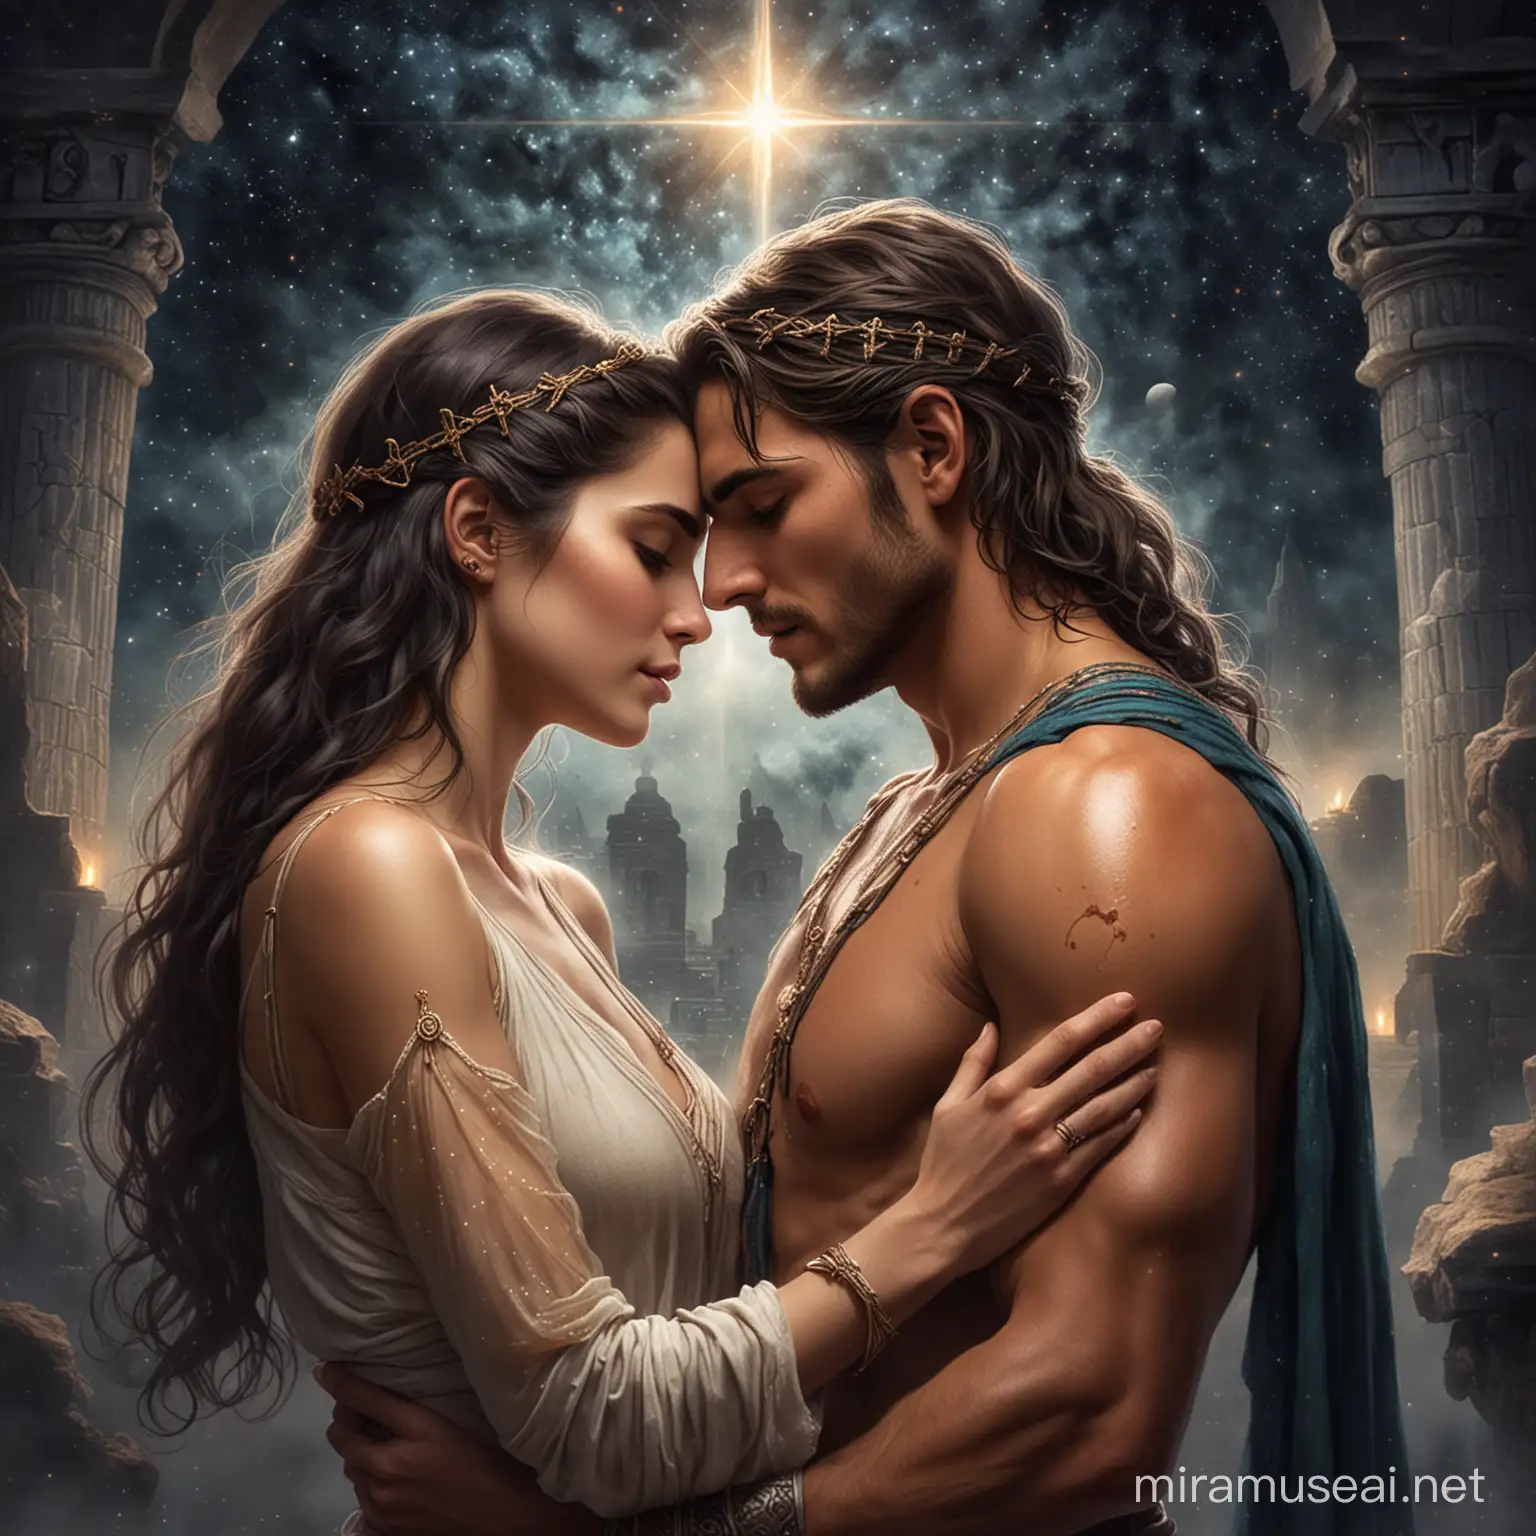 bonding of star crossed lovers by ancient rite